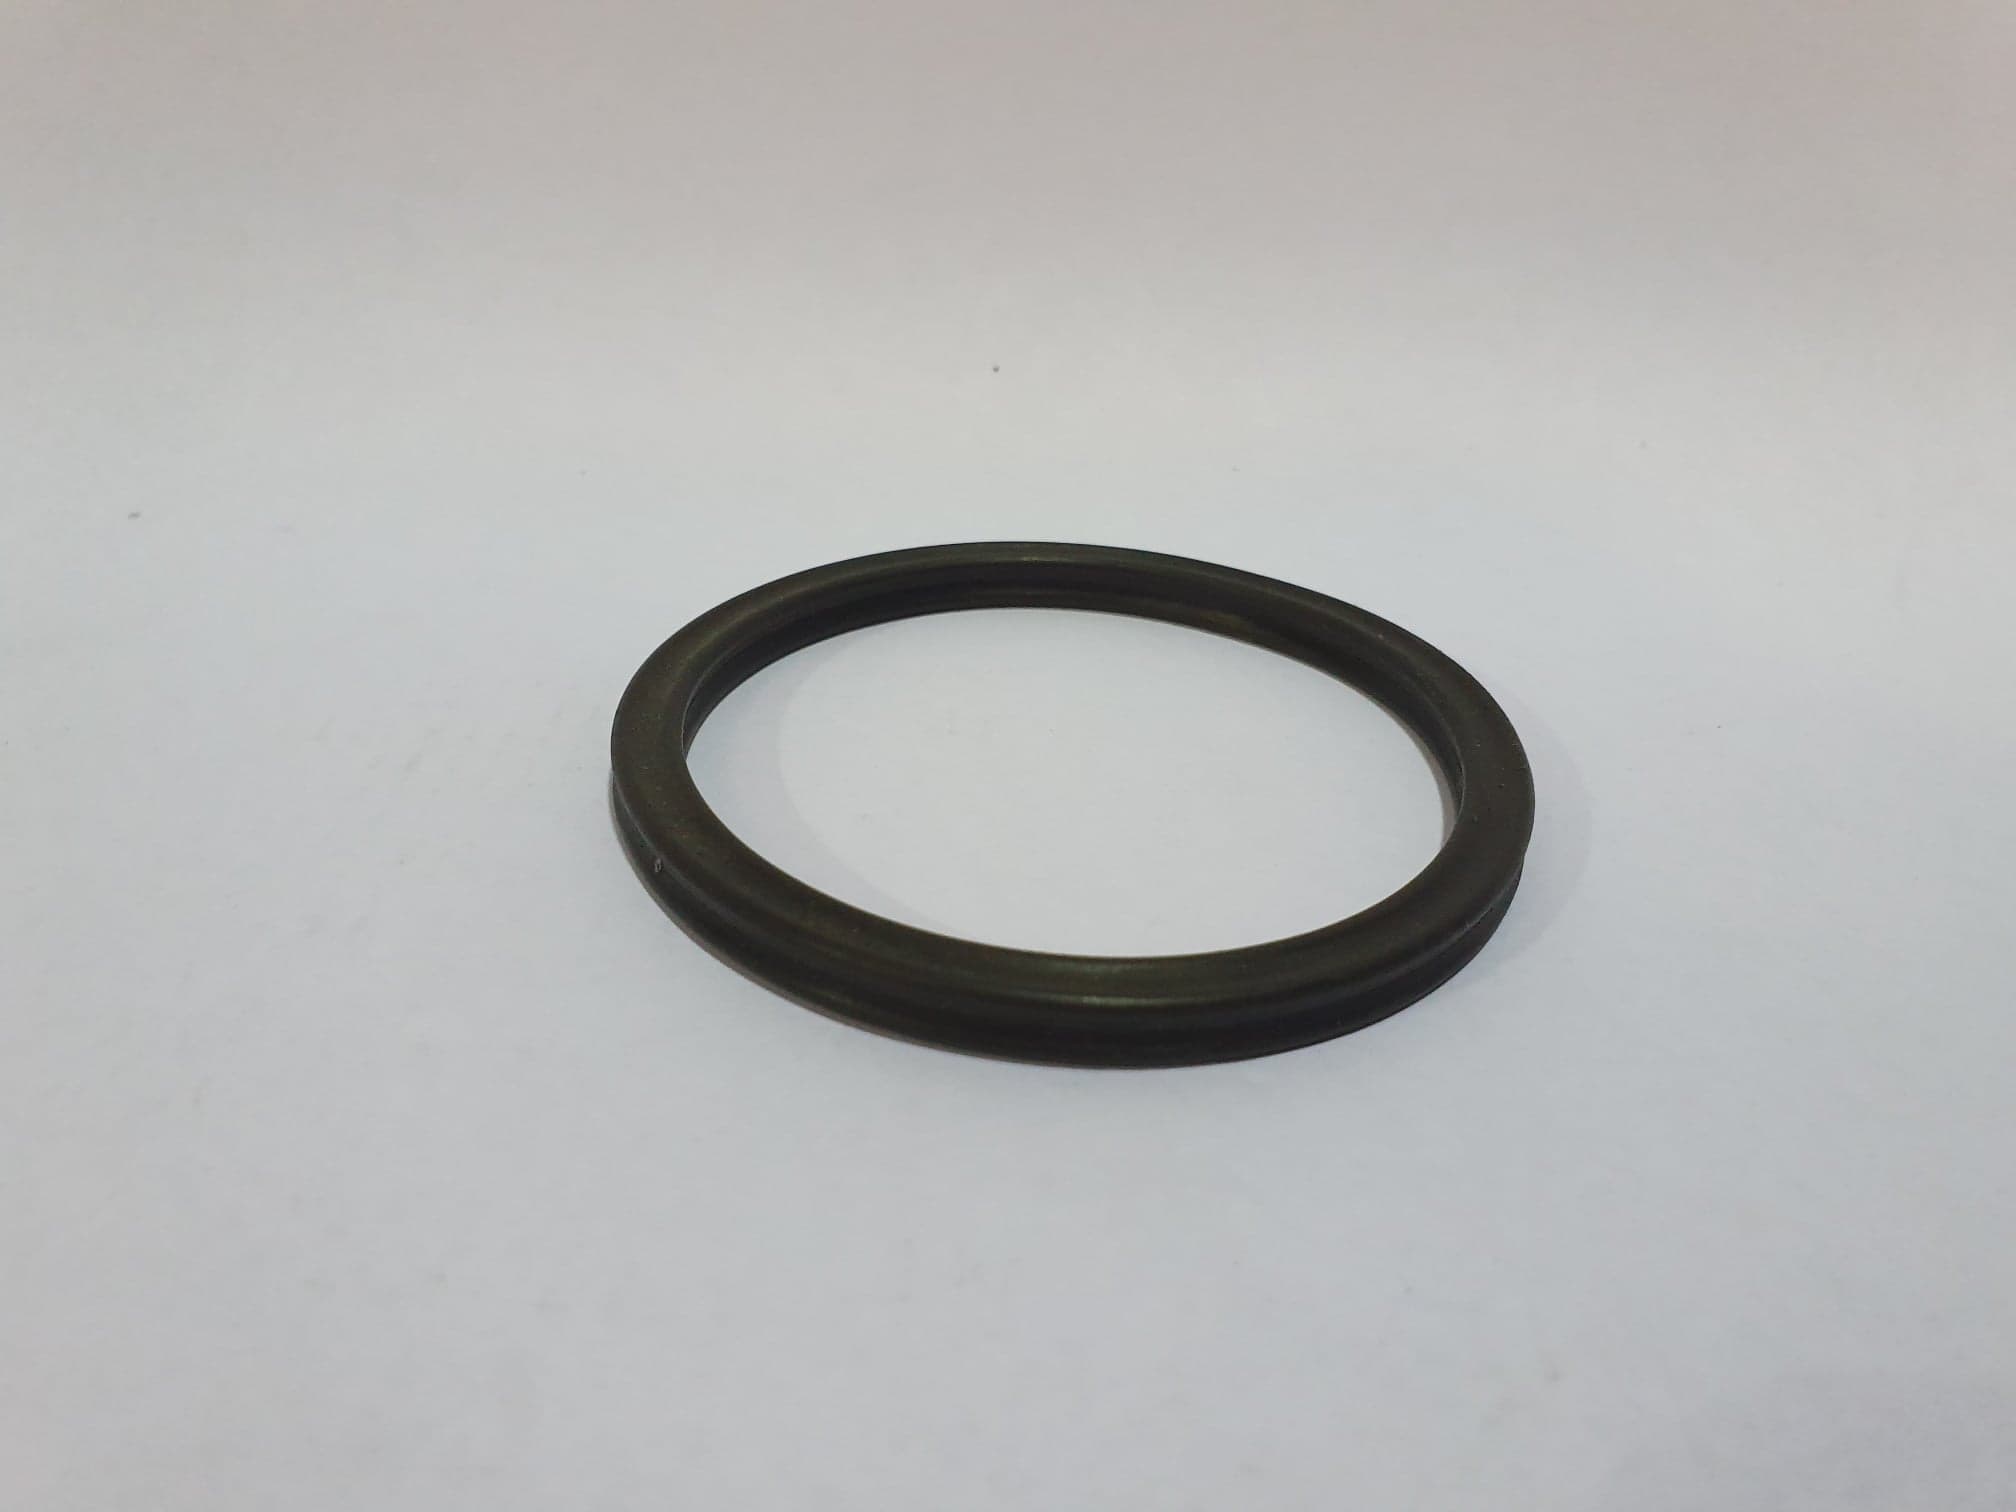  Hose Reel Inlet Housing Quad Seal (New Type)